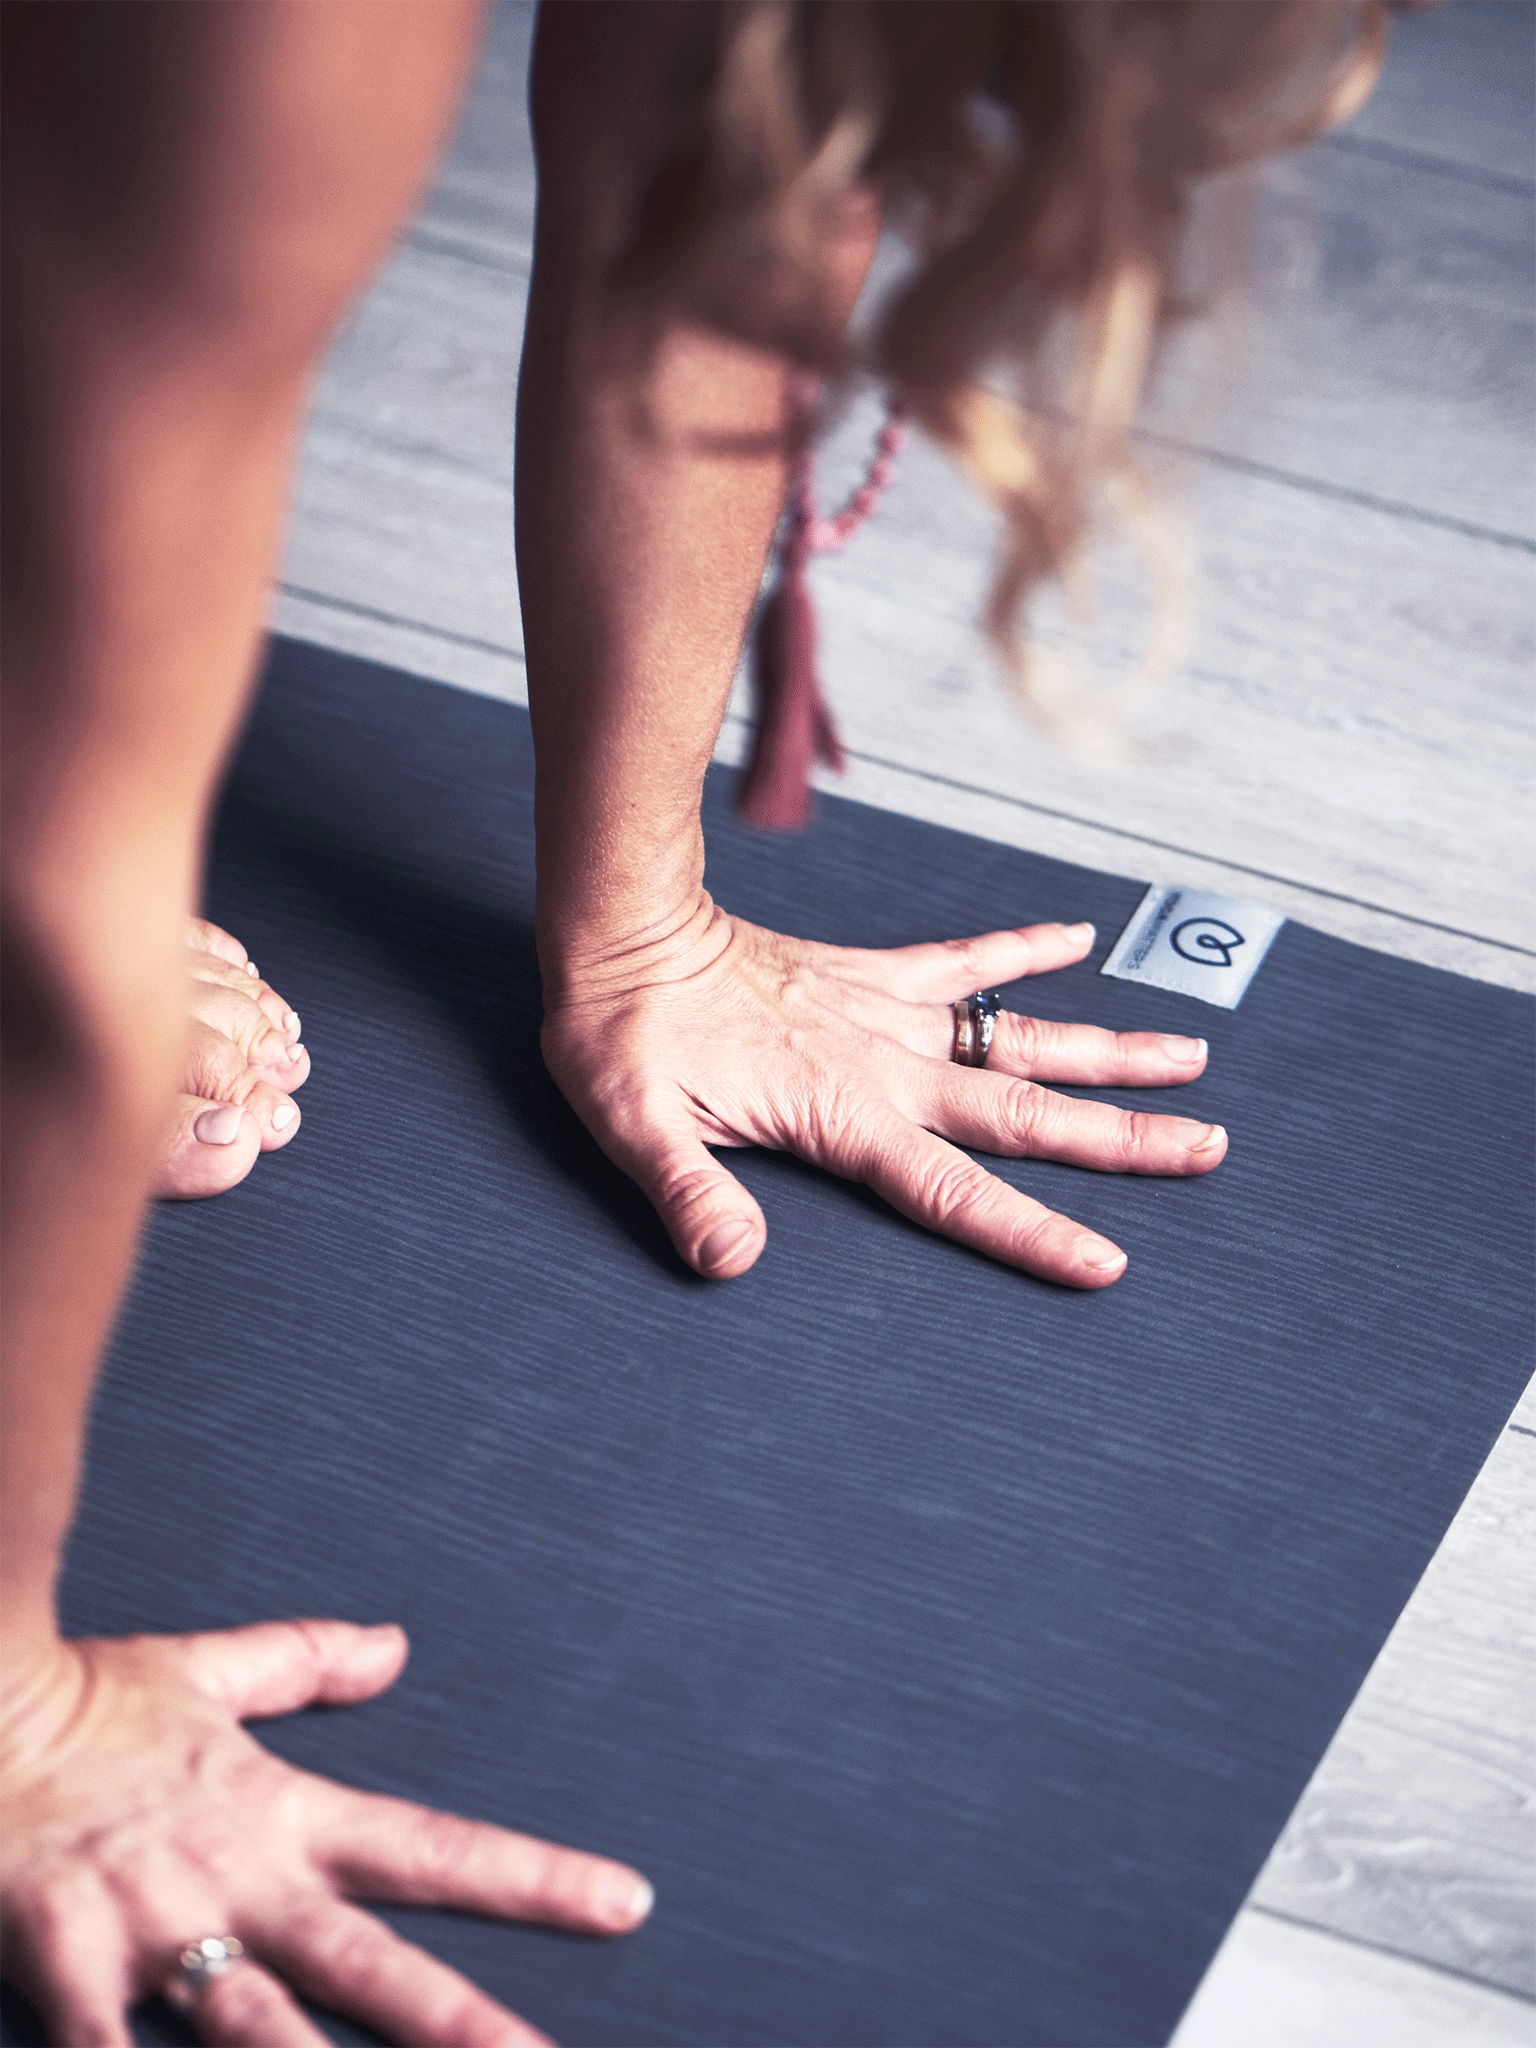 Woman practicing yoga with close-up on hands in downward-facing dog position on a dark grey yoga mat, featuring a visible logo, shot from the side on a wooden floor background.